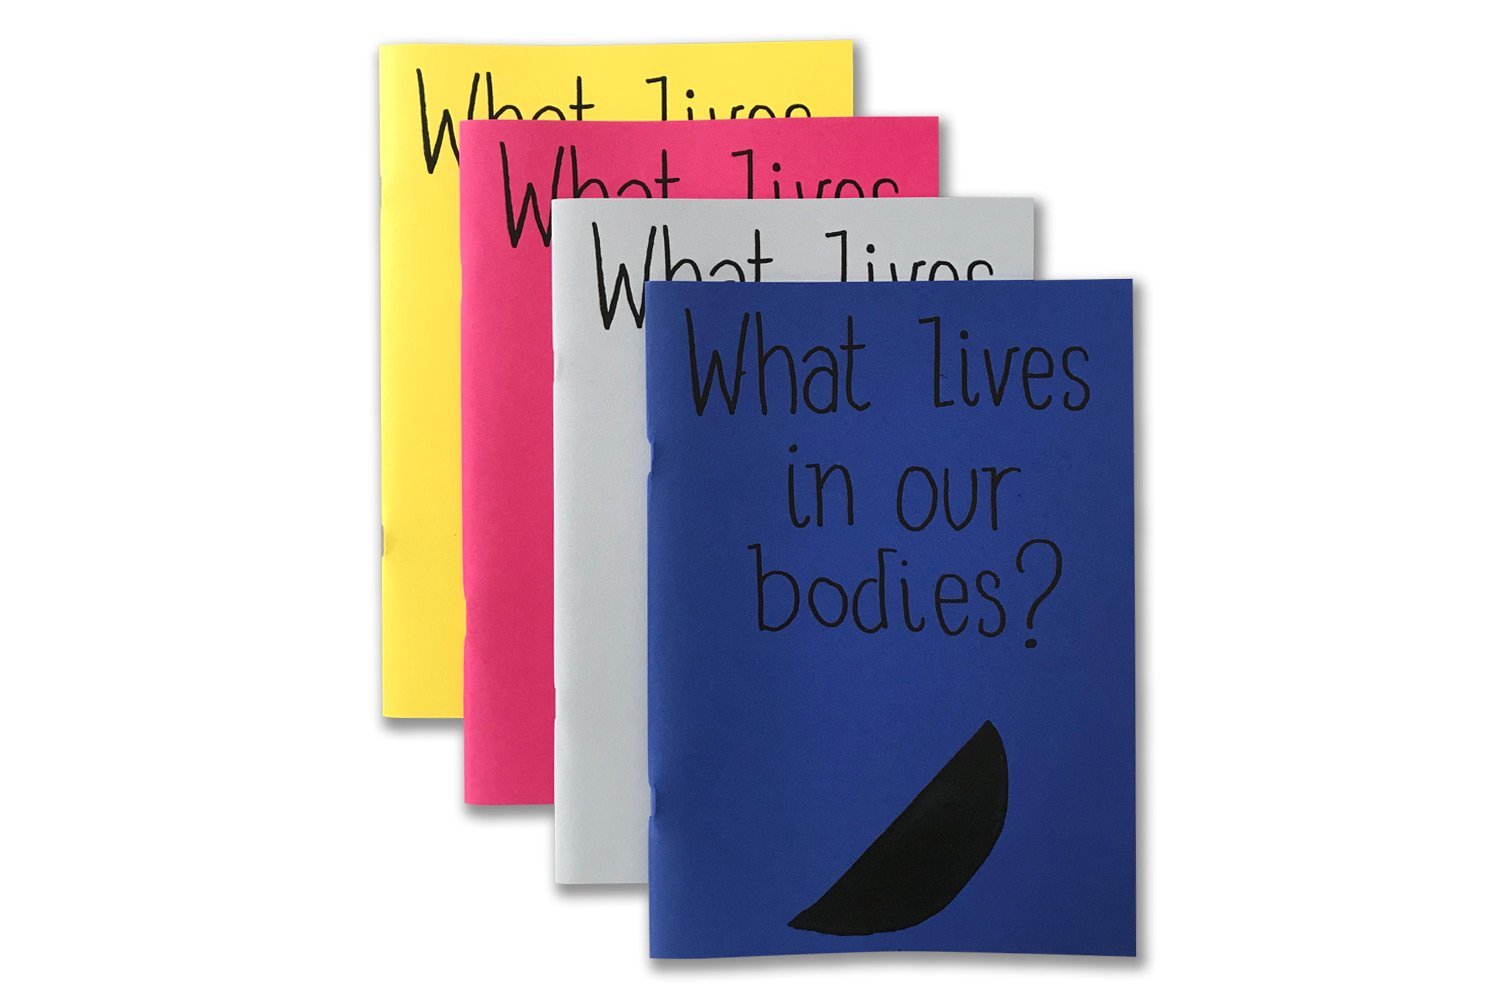 What lives in our bodies?